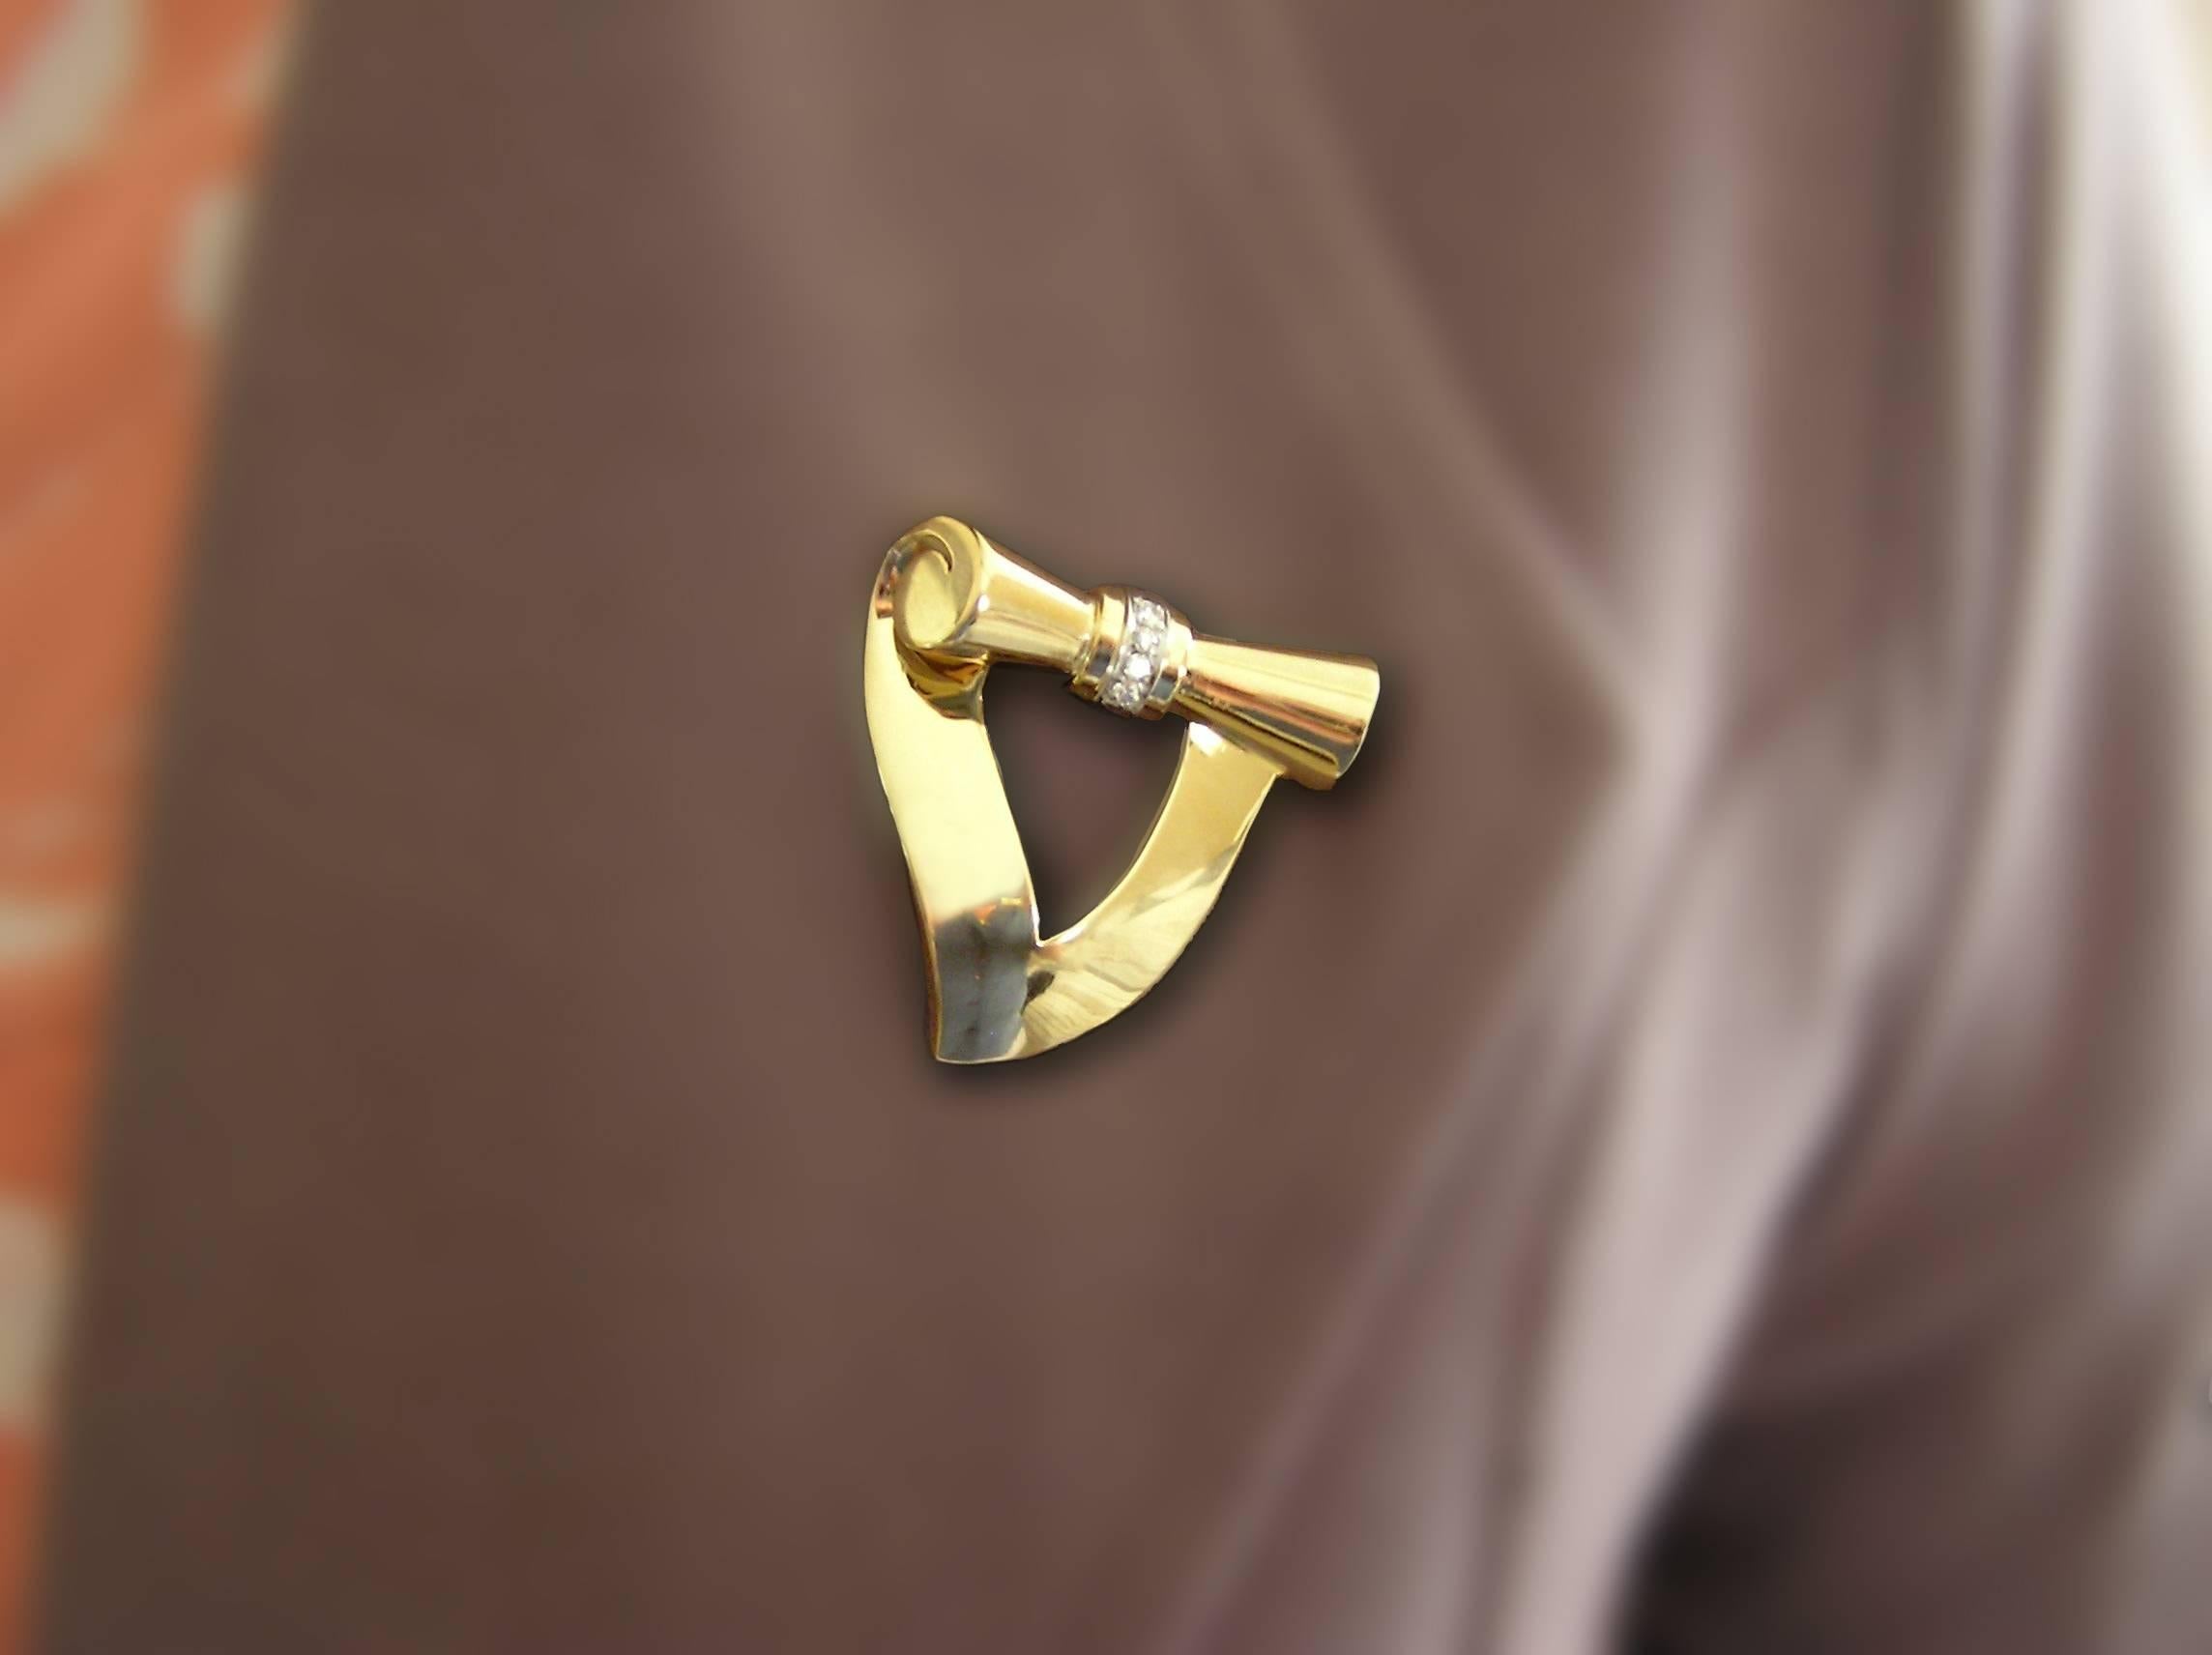 A wonderful 14K yellow gold retro diamond ribbon pin.  As new from the 1940's!  Accented with about .20 carats of G Color, VS1 Clarity diamonds. Strongly modeled with depth. A nice casual piece for daytime wear, as well as evening. About 1 1/4